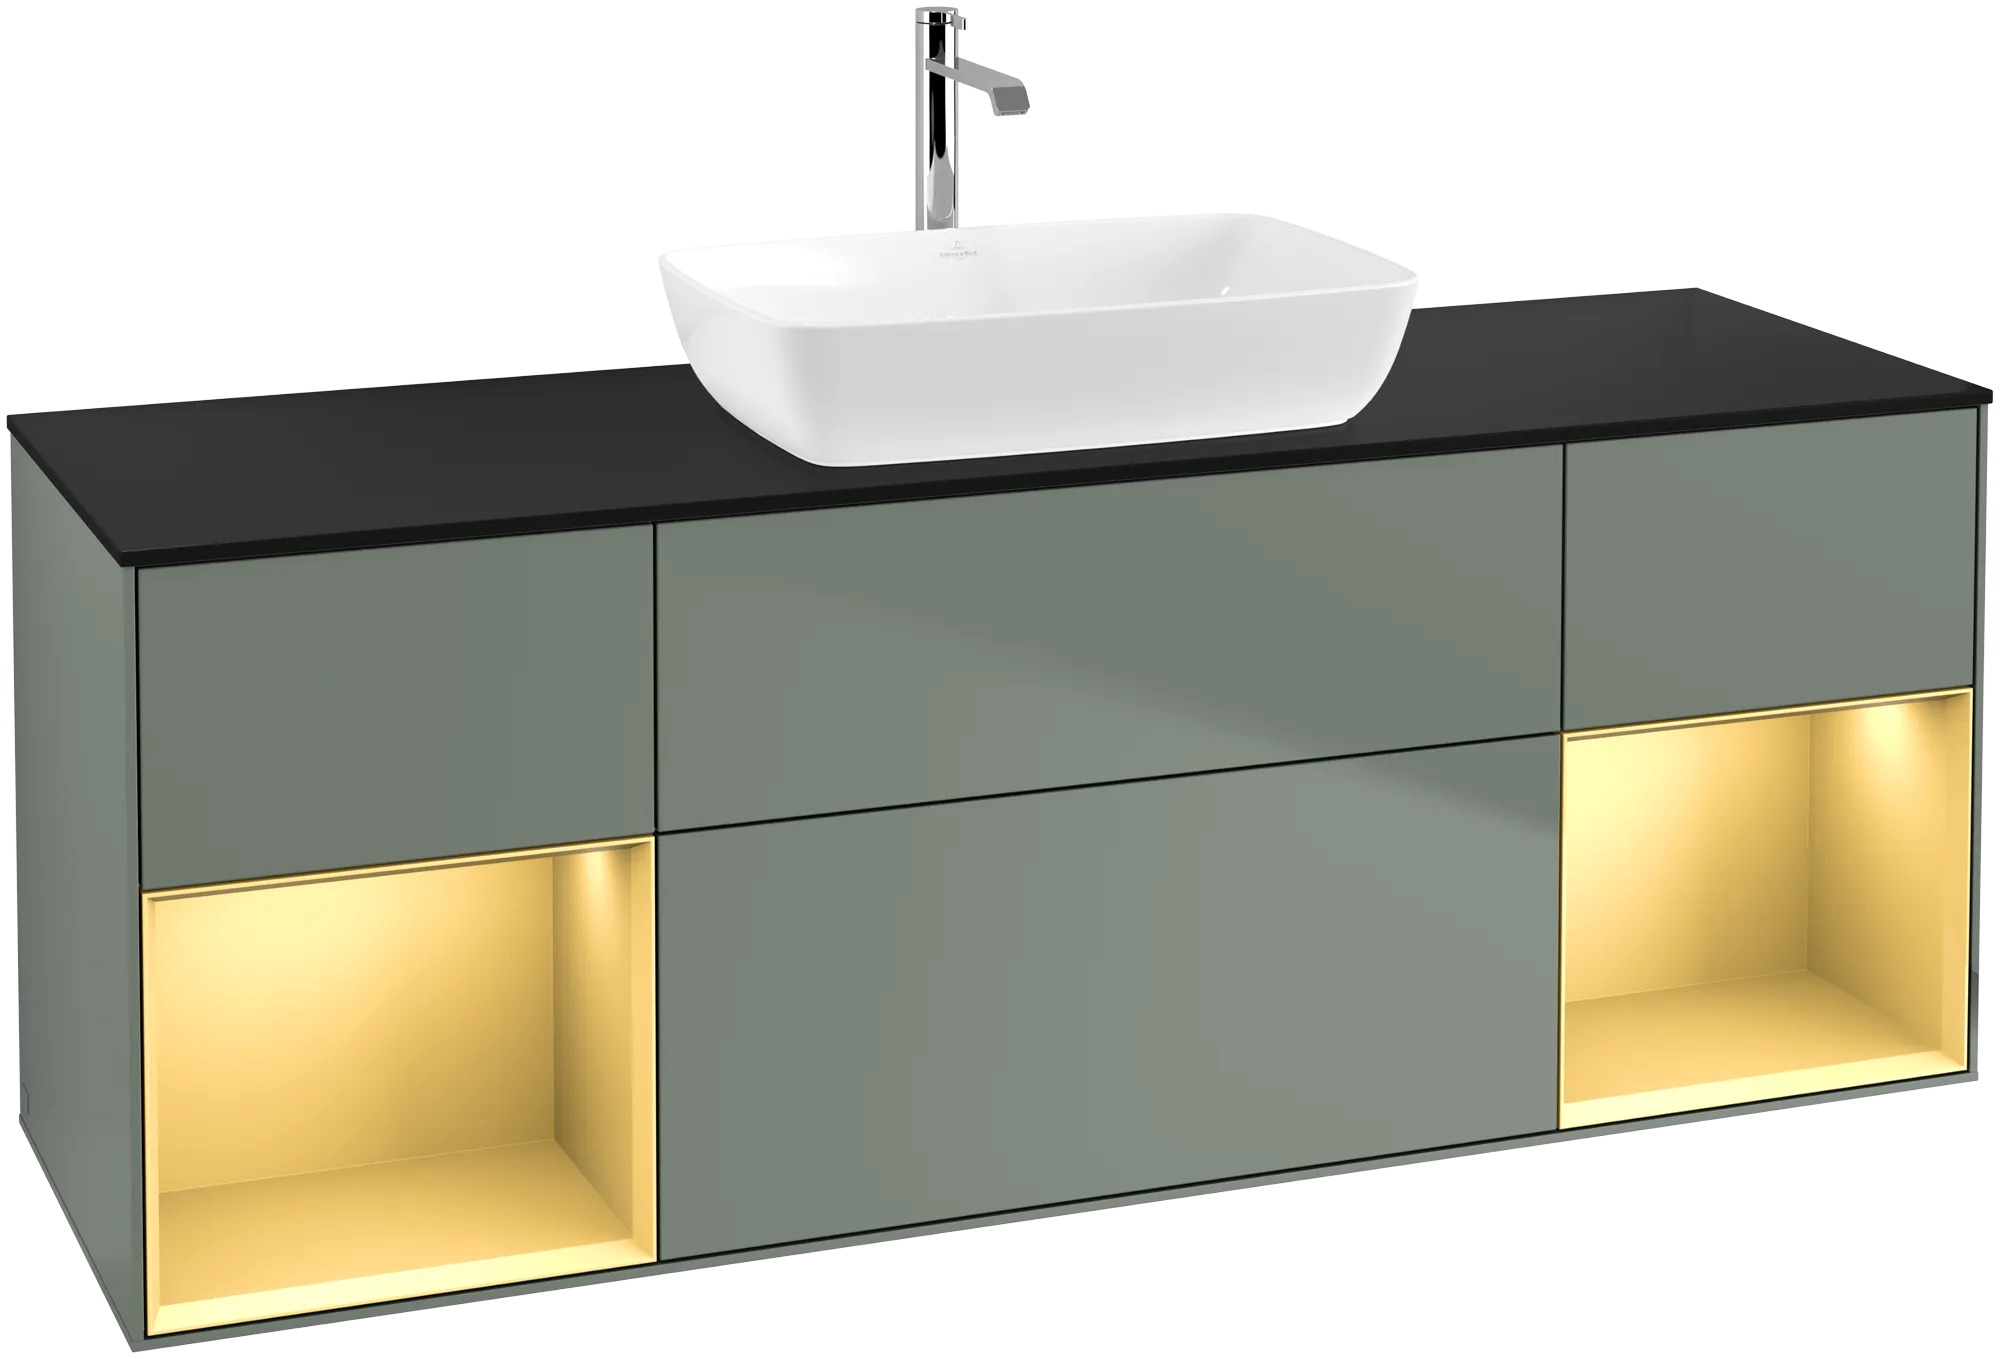 VILLEROY BOCH Finion Vanity unit, with lighting, 4 pull-out compartments, 1600 x 603 x 501 mm, Olive Matt Lacquer / Gold Matt Lacquer / Glass Black Matt #G862HFGM resmi